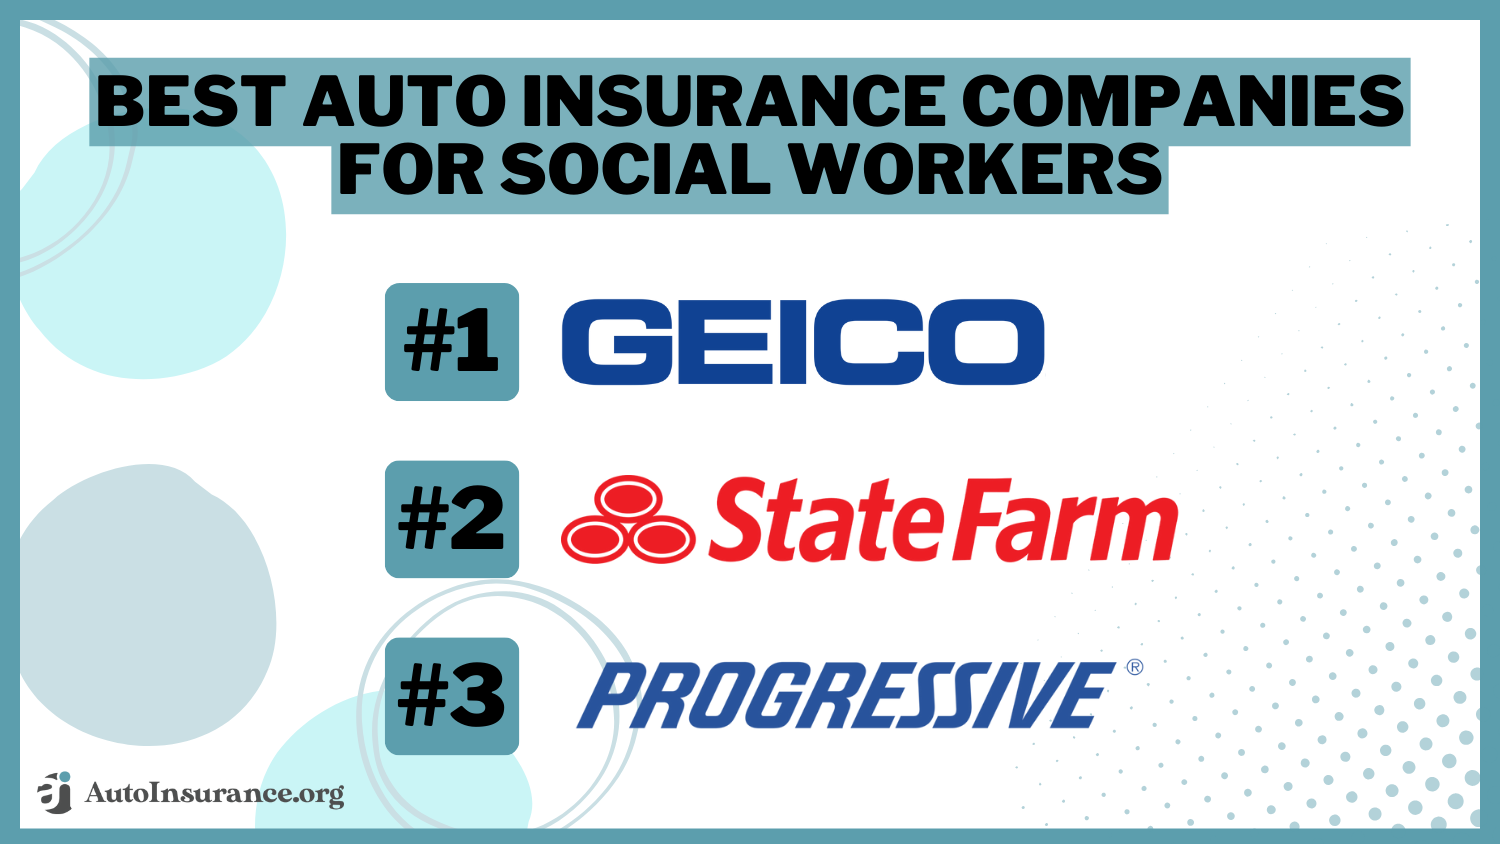 Best Auto Insurance Companies for Social Workers: Geico, State Farm, and Progressive